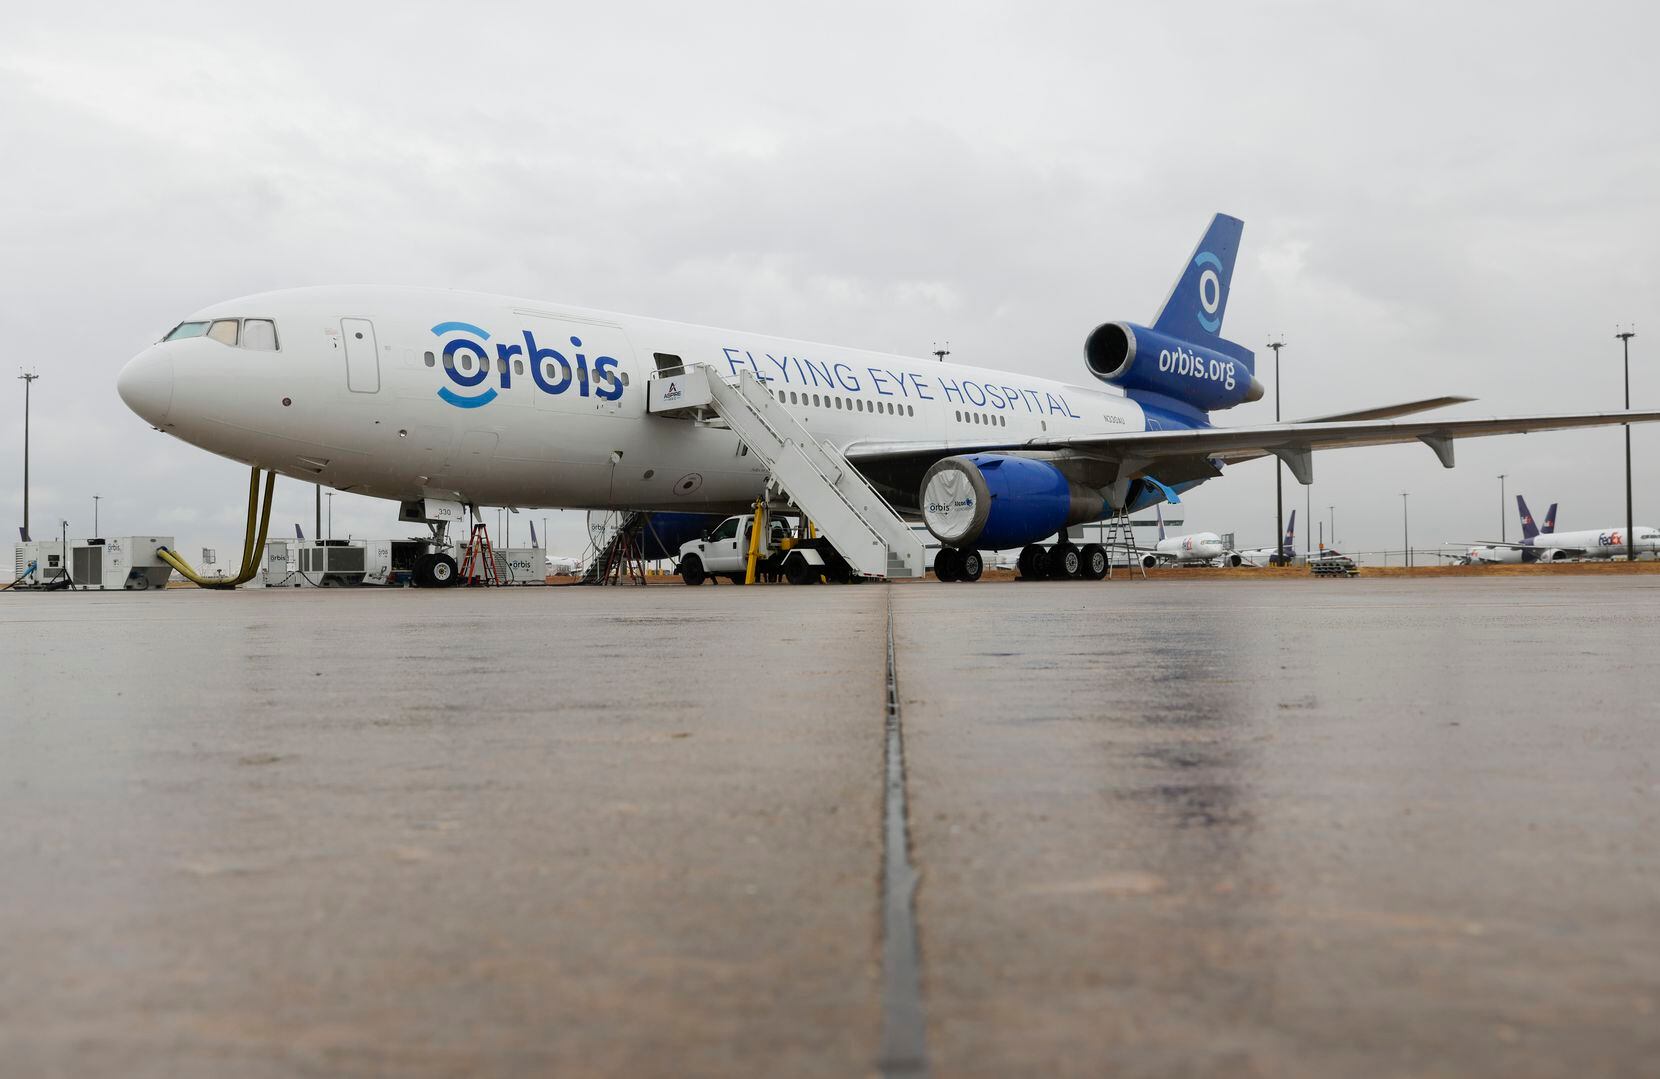 Orbis Flying Eye Hospital, located in Fort Worth Alliance Airport on Thursday, Aug. 18,...